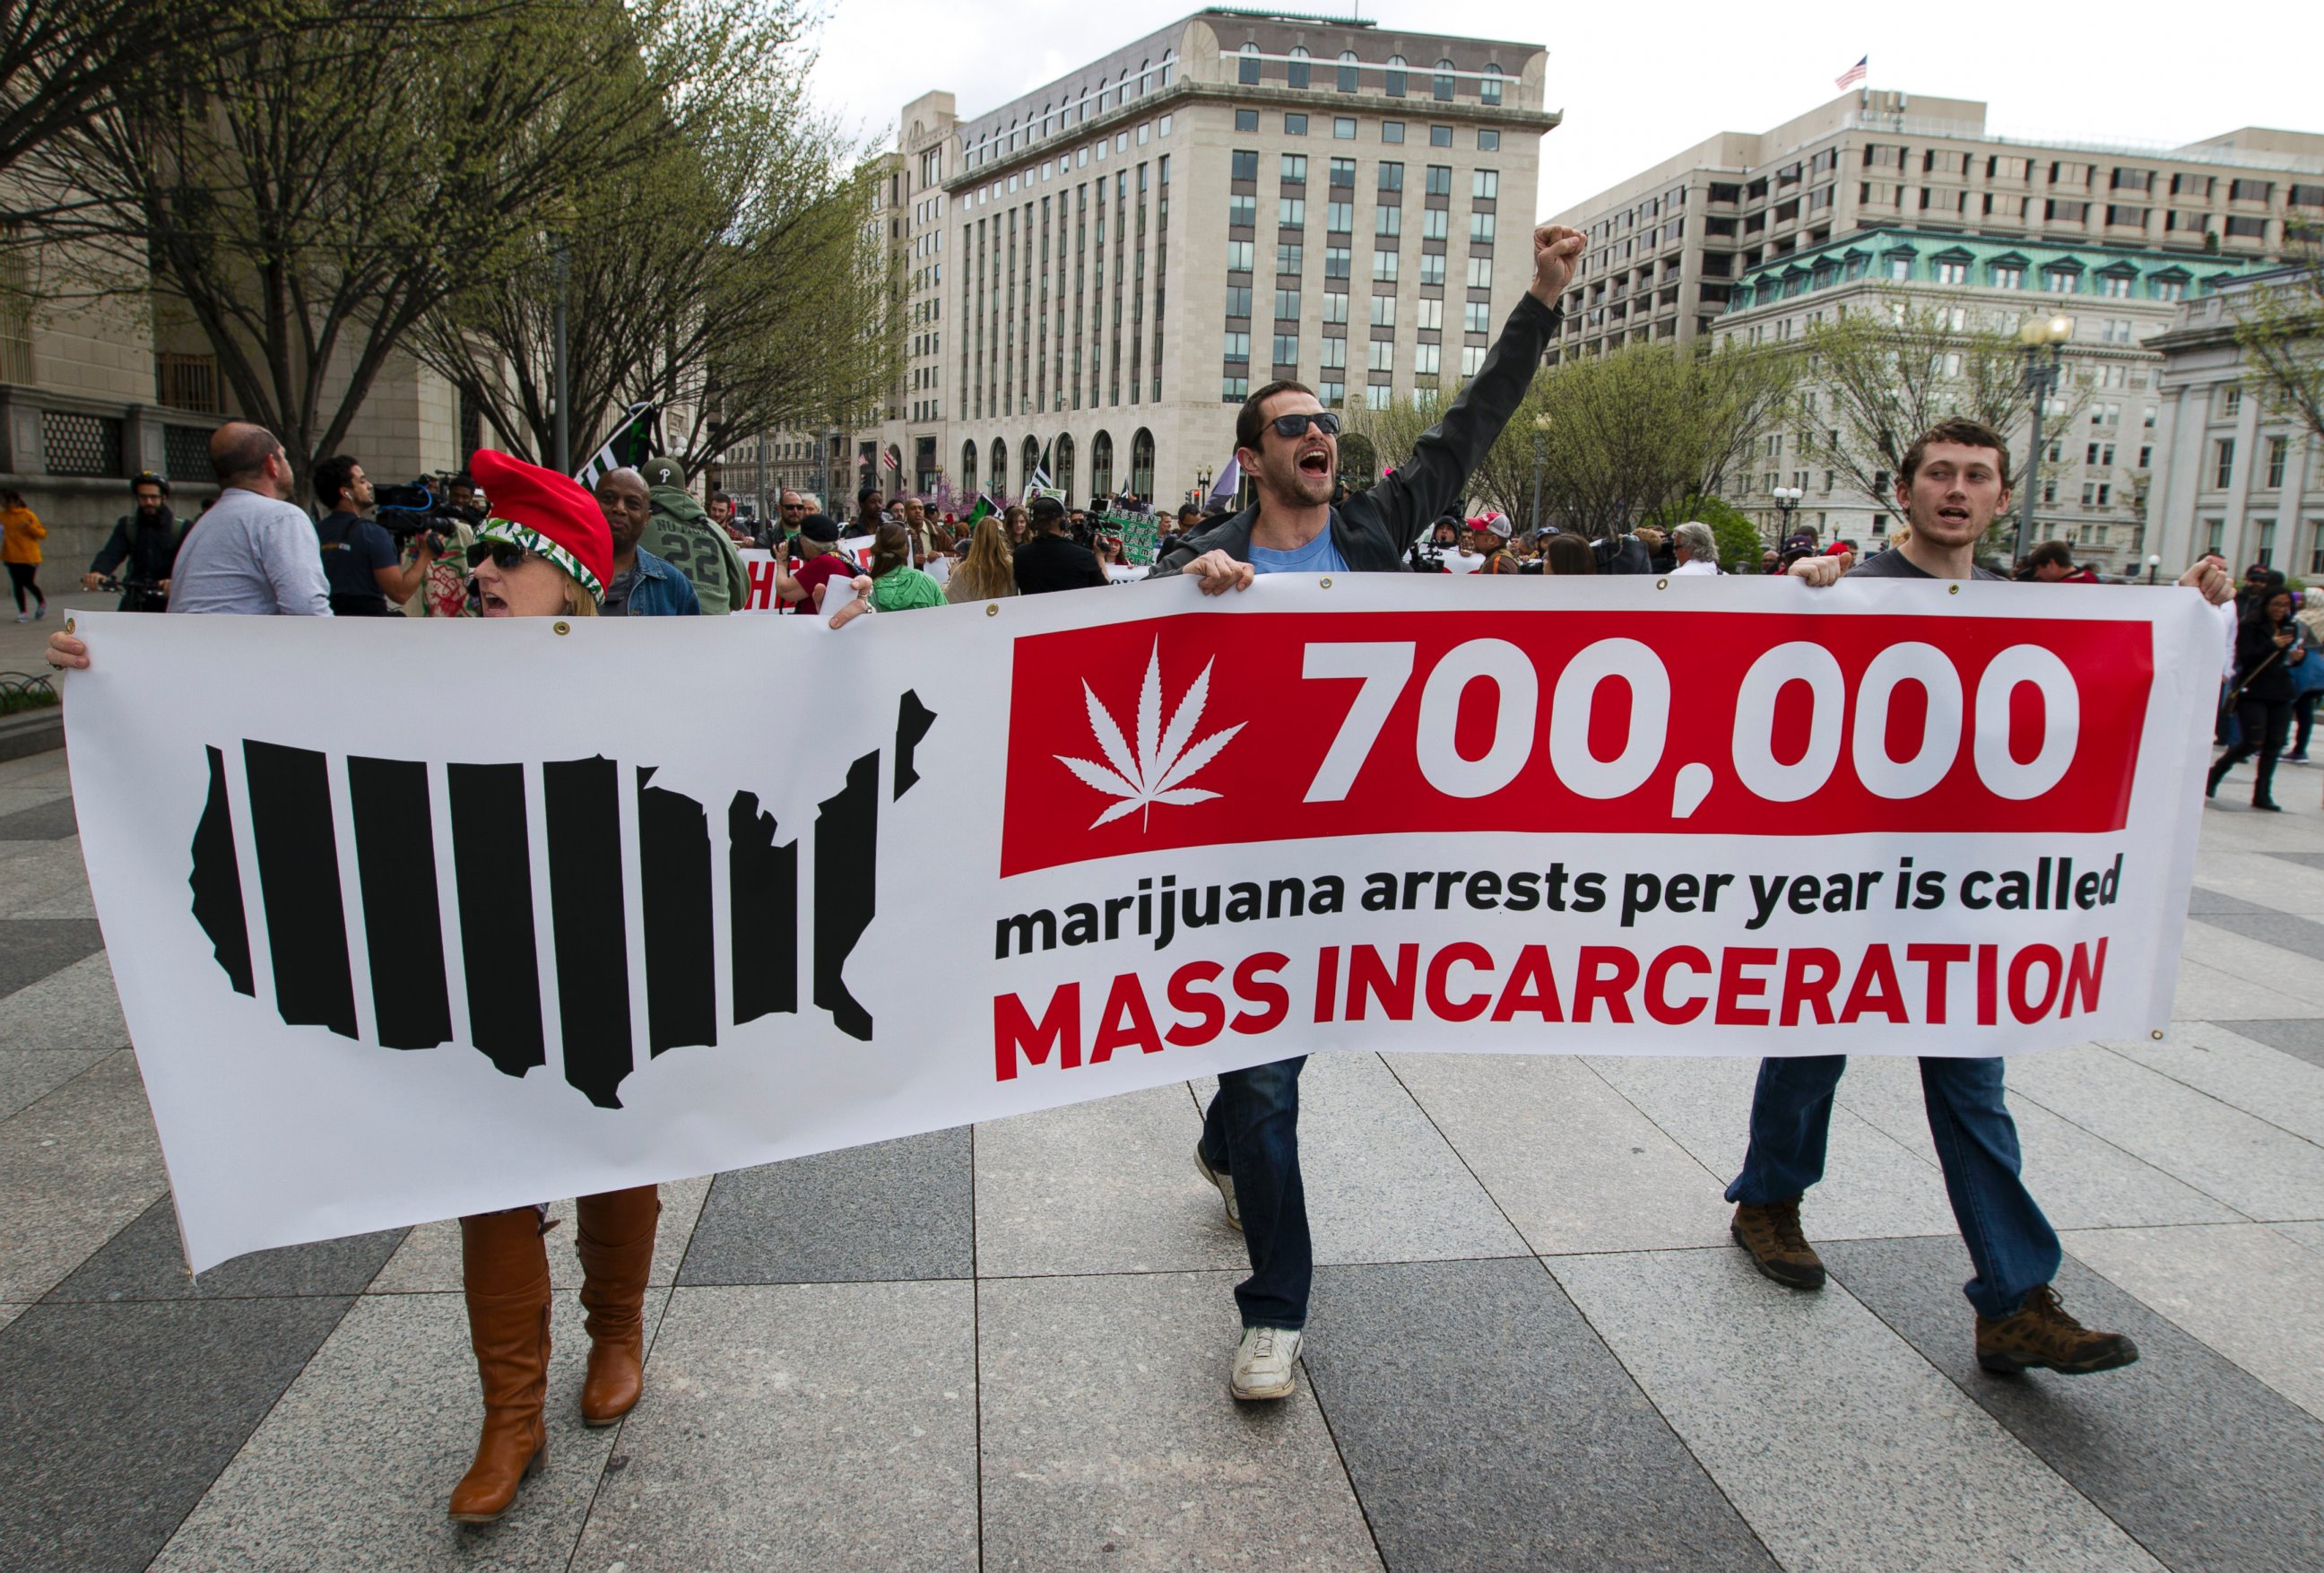 PHOTO: Demonstrators march for the legalization of marijuana outside of the White House, in Washington, April 2, 2016.